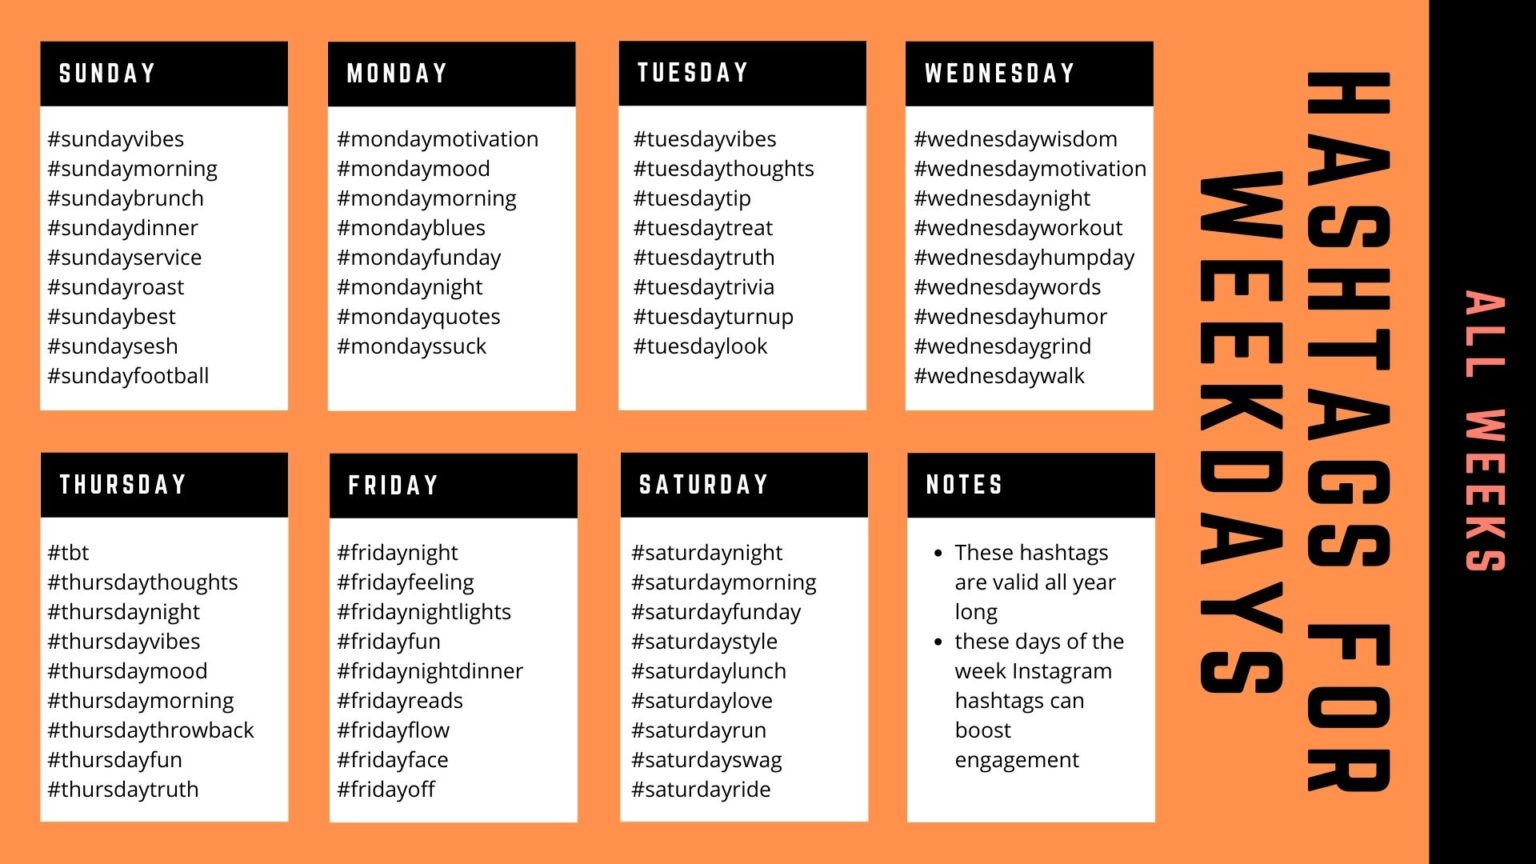 Instagram Hashtags for National Days, Social Media Events and Every Day